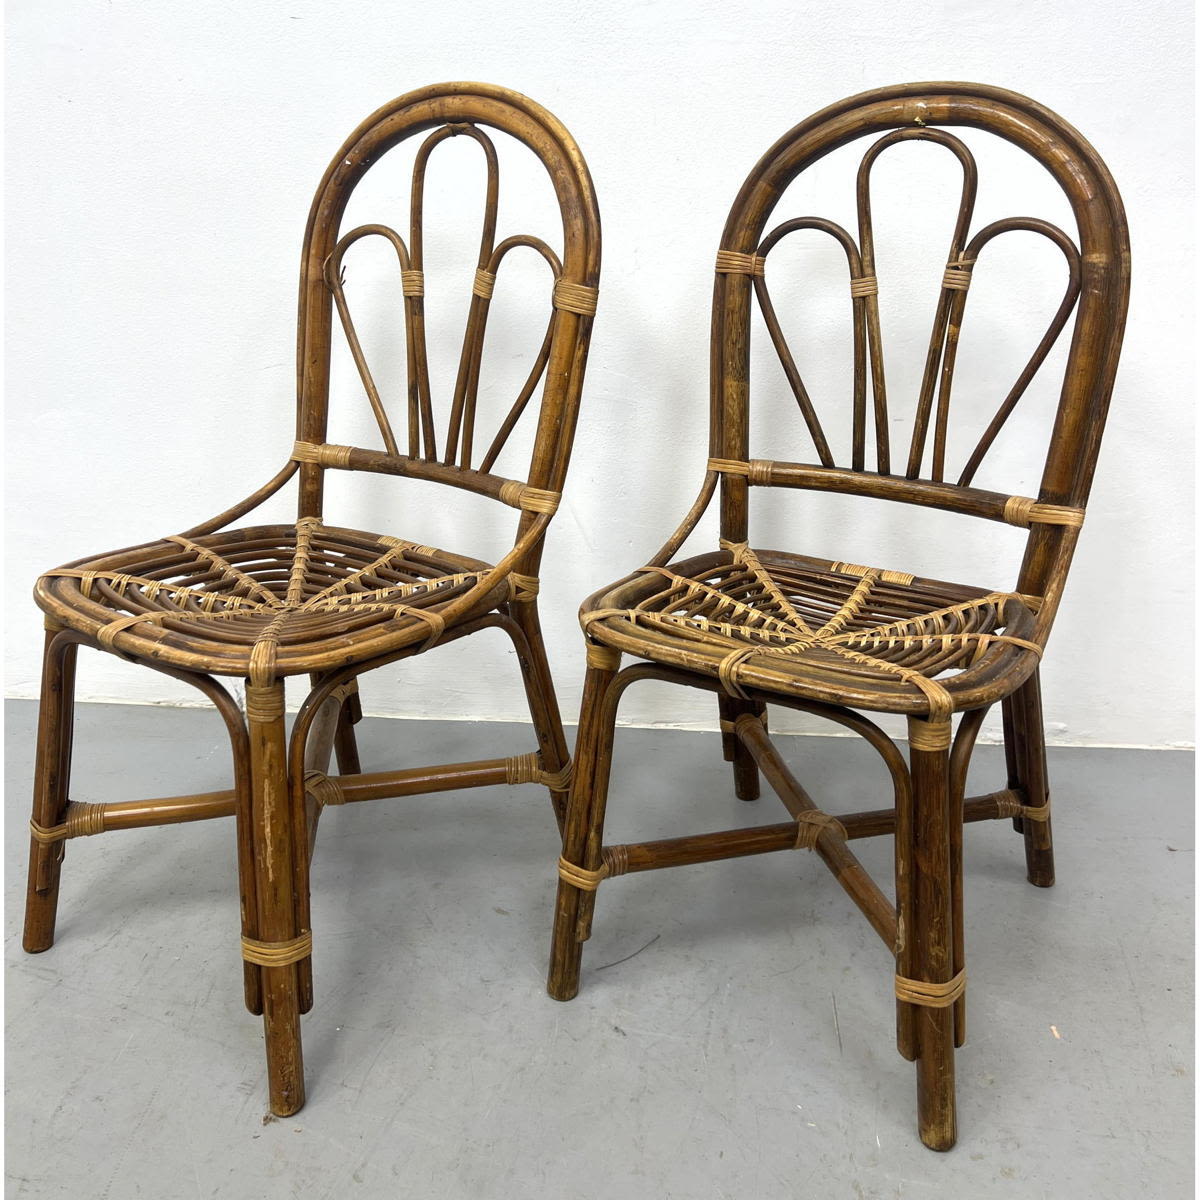 Pair Wicker and Bamboo Chairs  2ff8b1